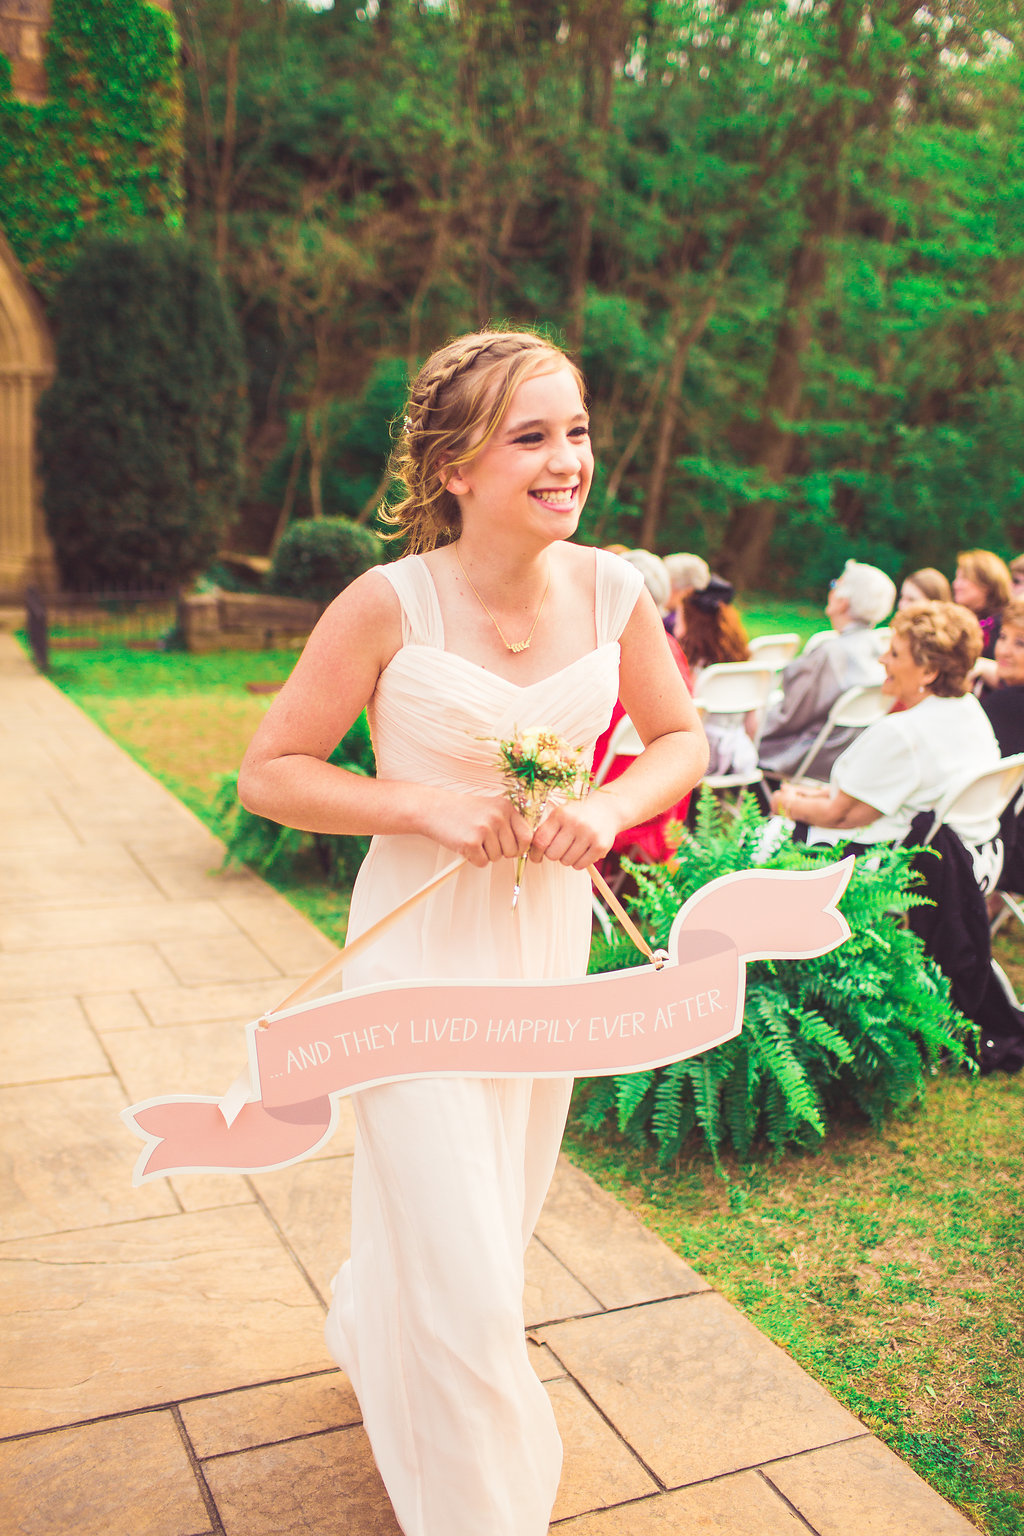 Wedding Photograph Of Woman in Dress Holding  a Wedding Signage Los Angeles